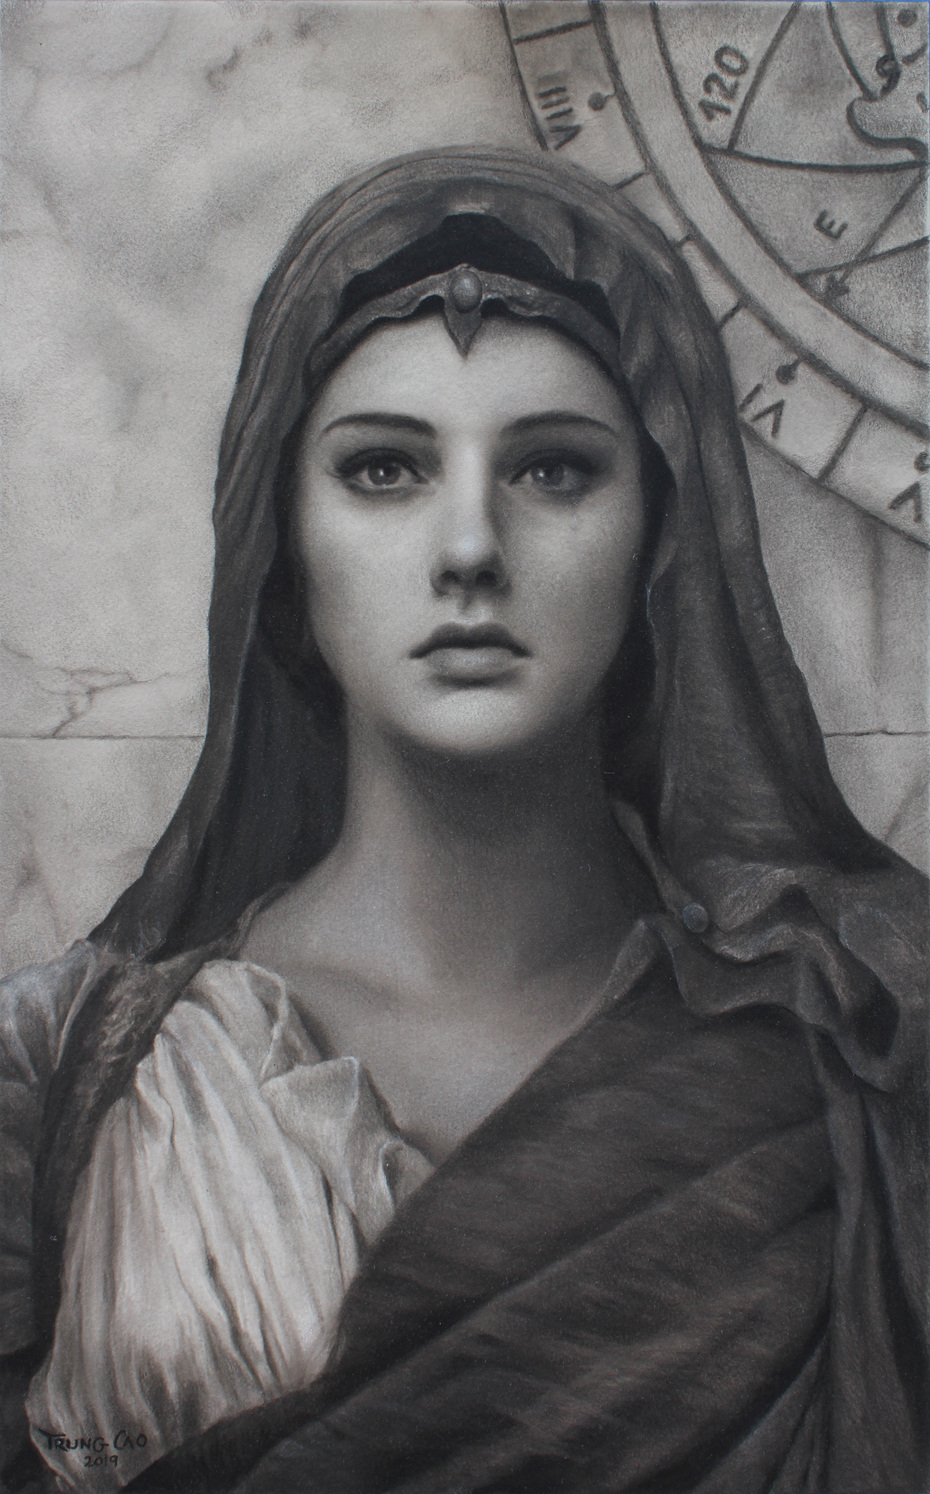 Hypatia, 20 x 13 in, graphite and charcoal.